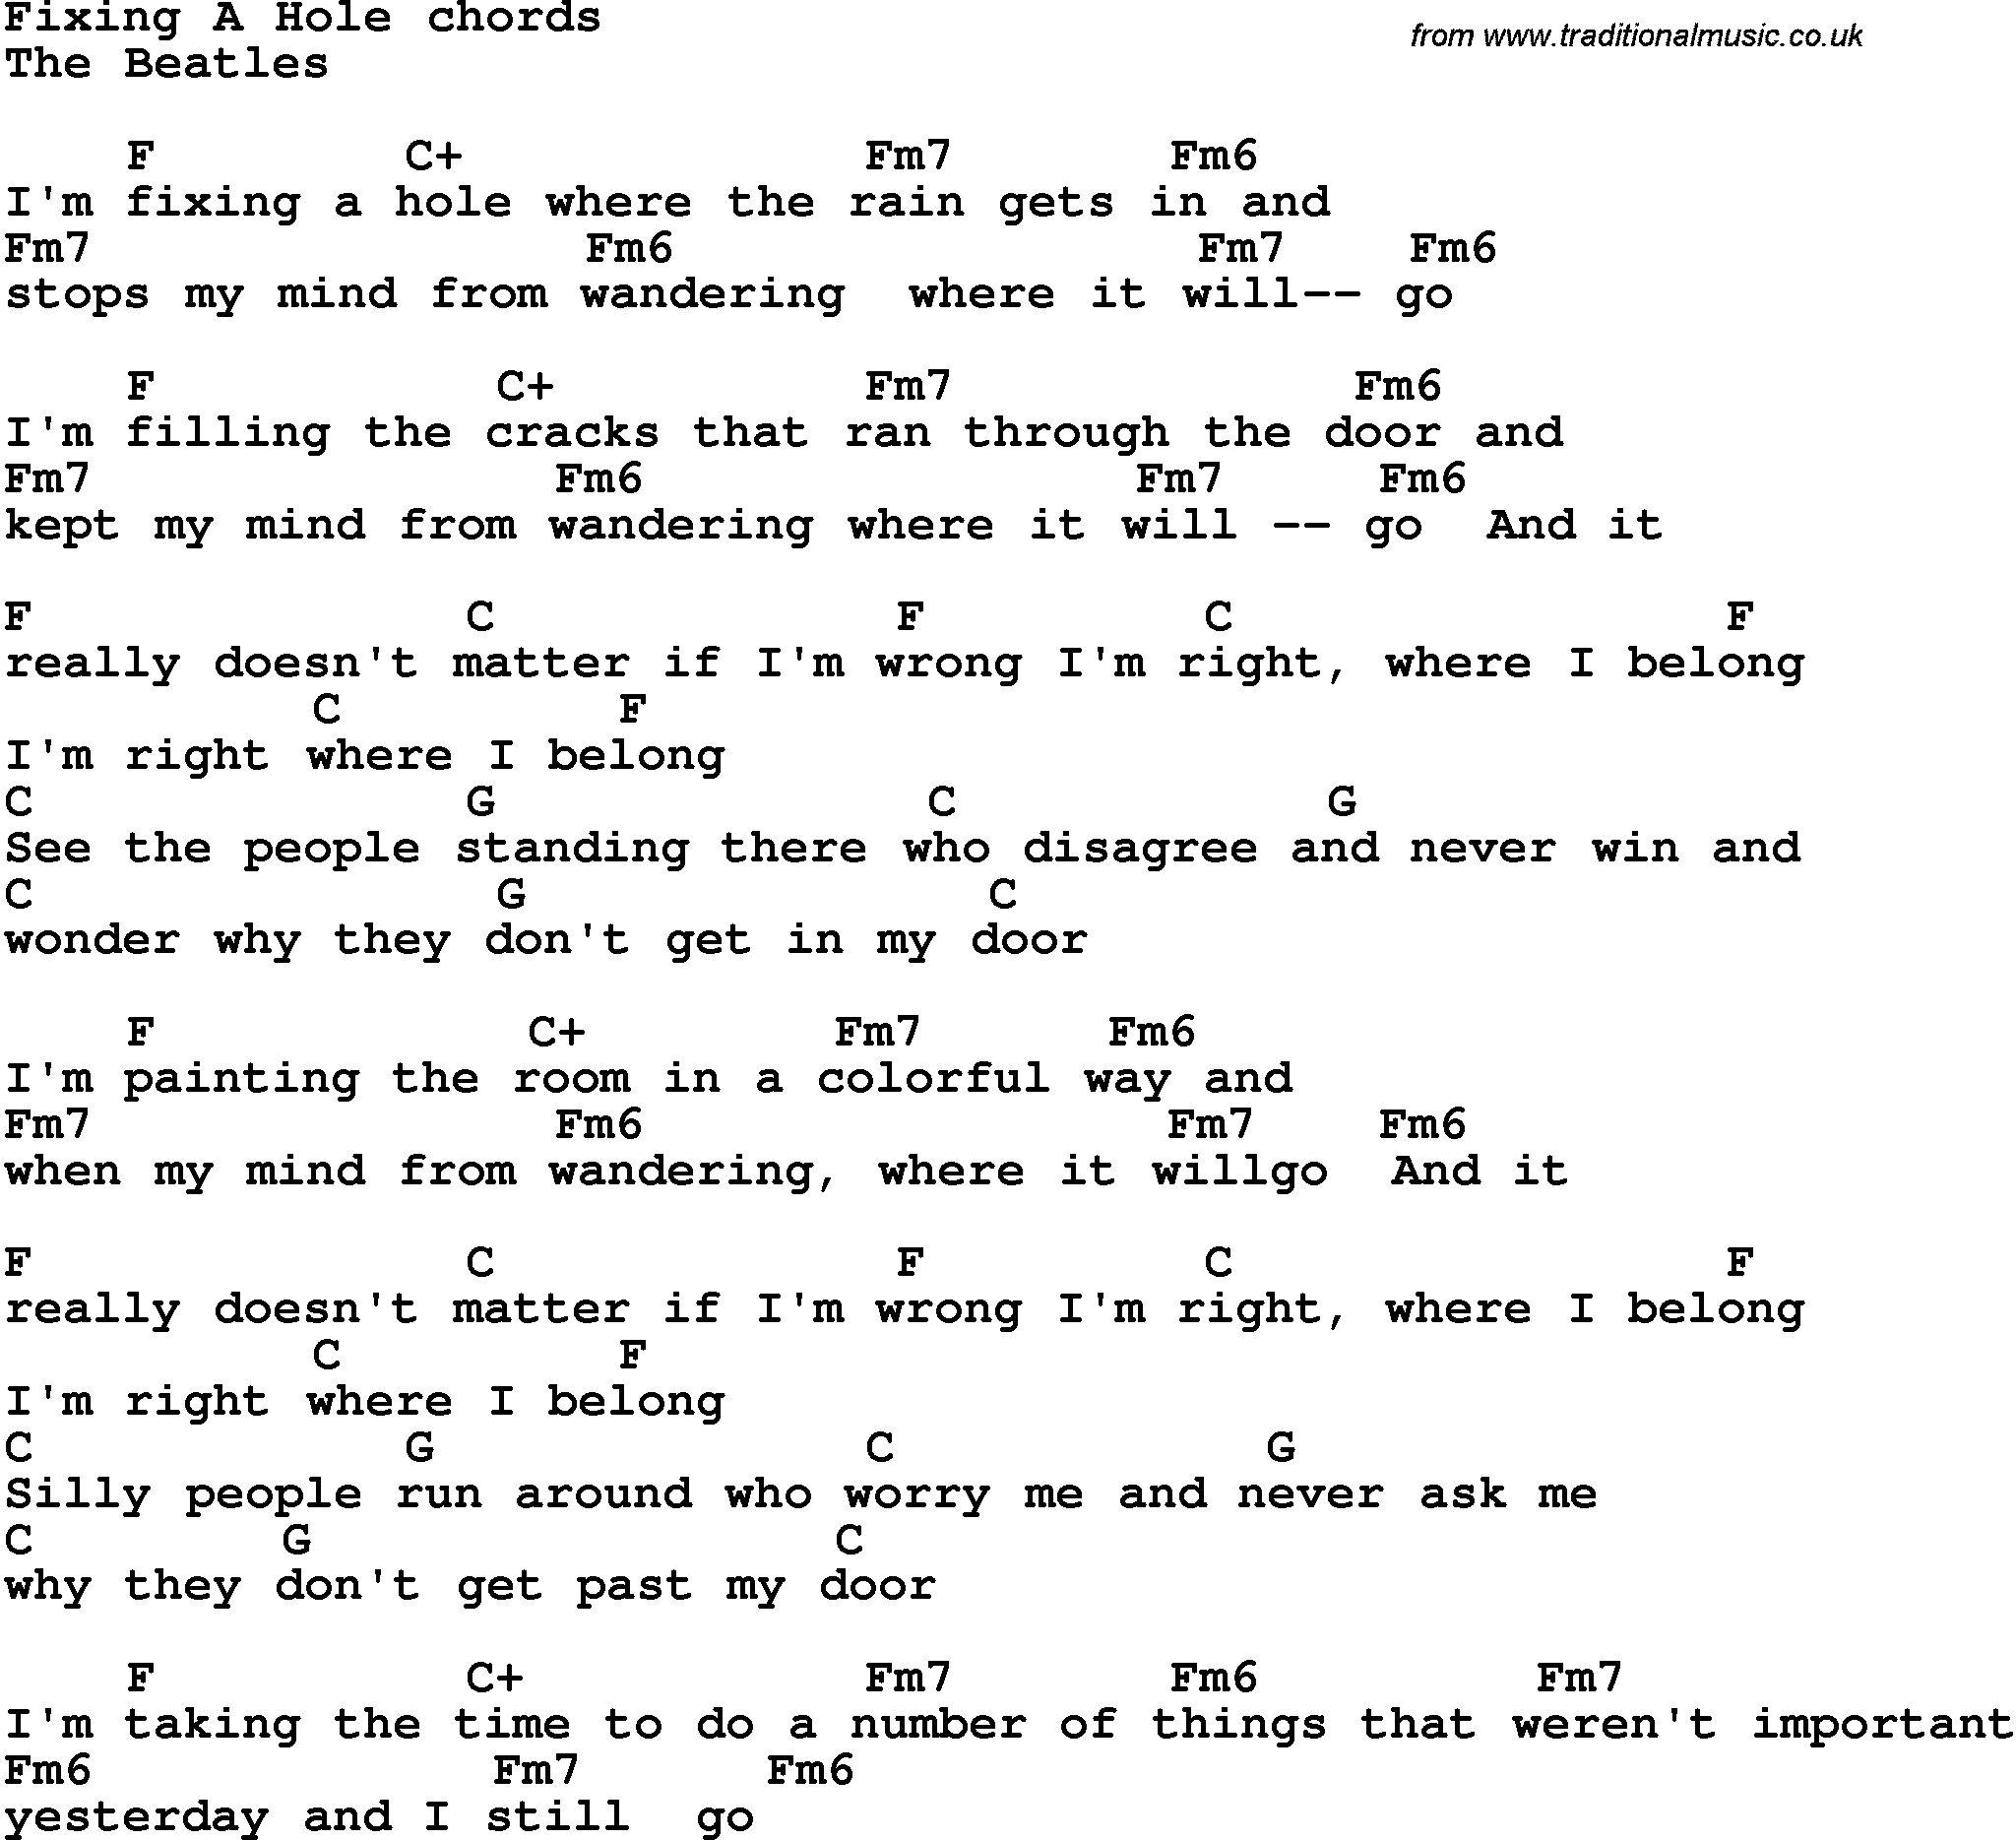 Song Lyrics with guitar chords for Fixing A Hole - The Beatles